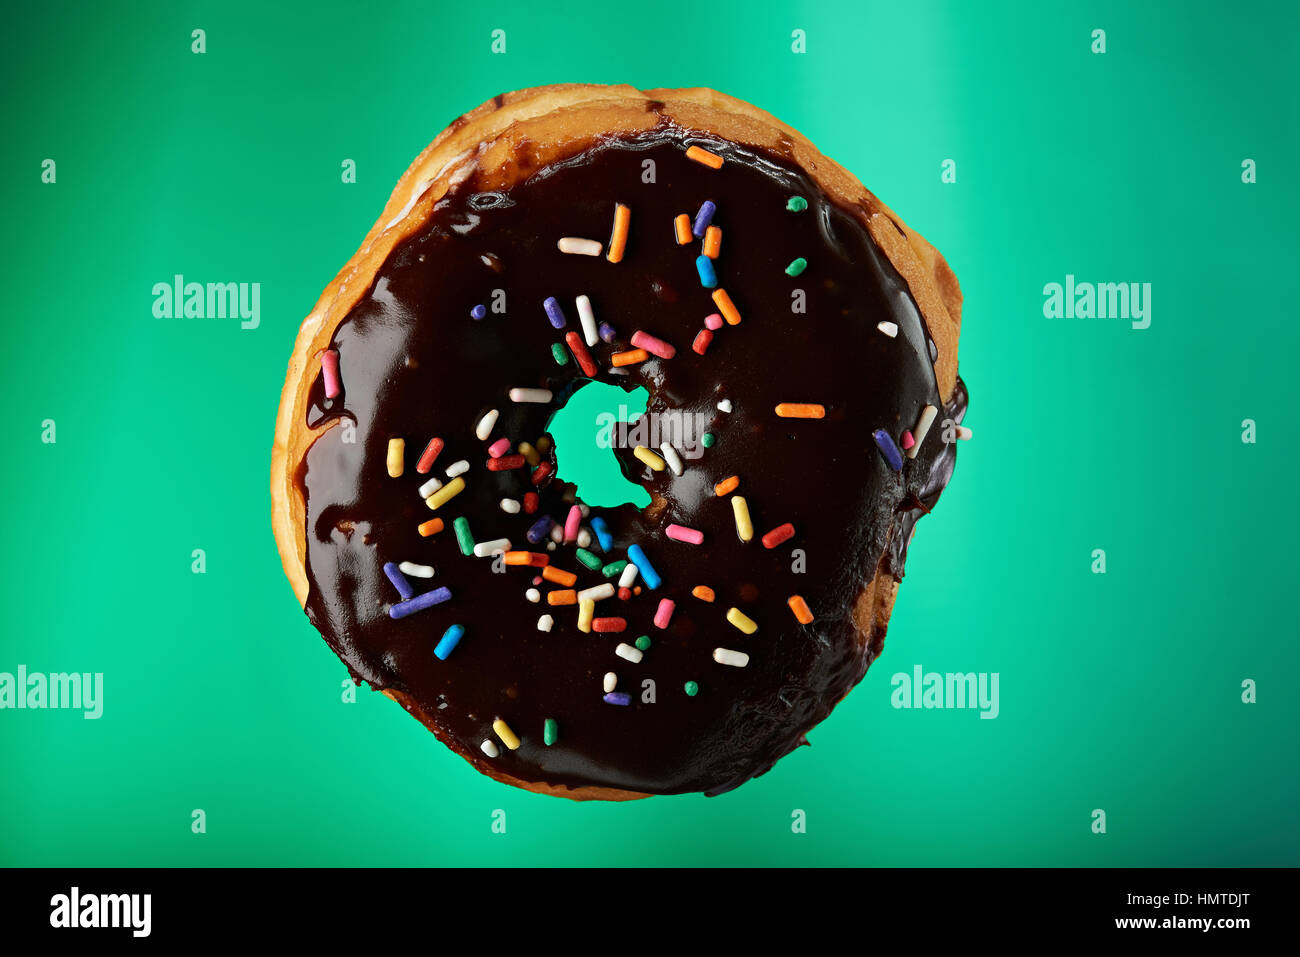 tasty chocolate donut isolated on green background Stock Photo